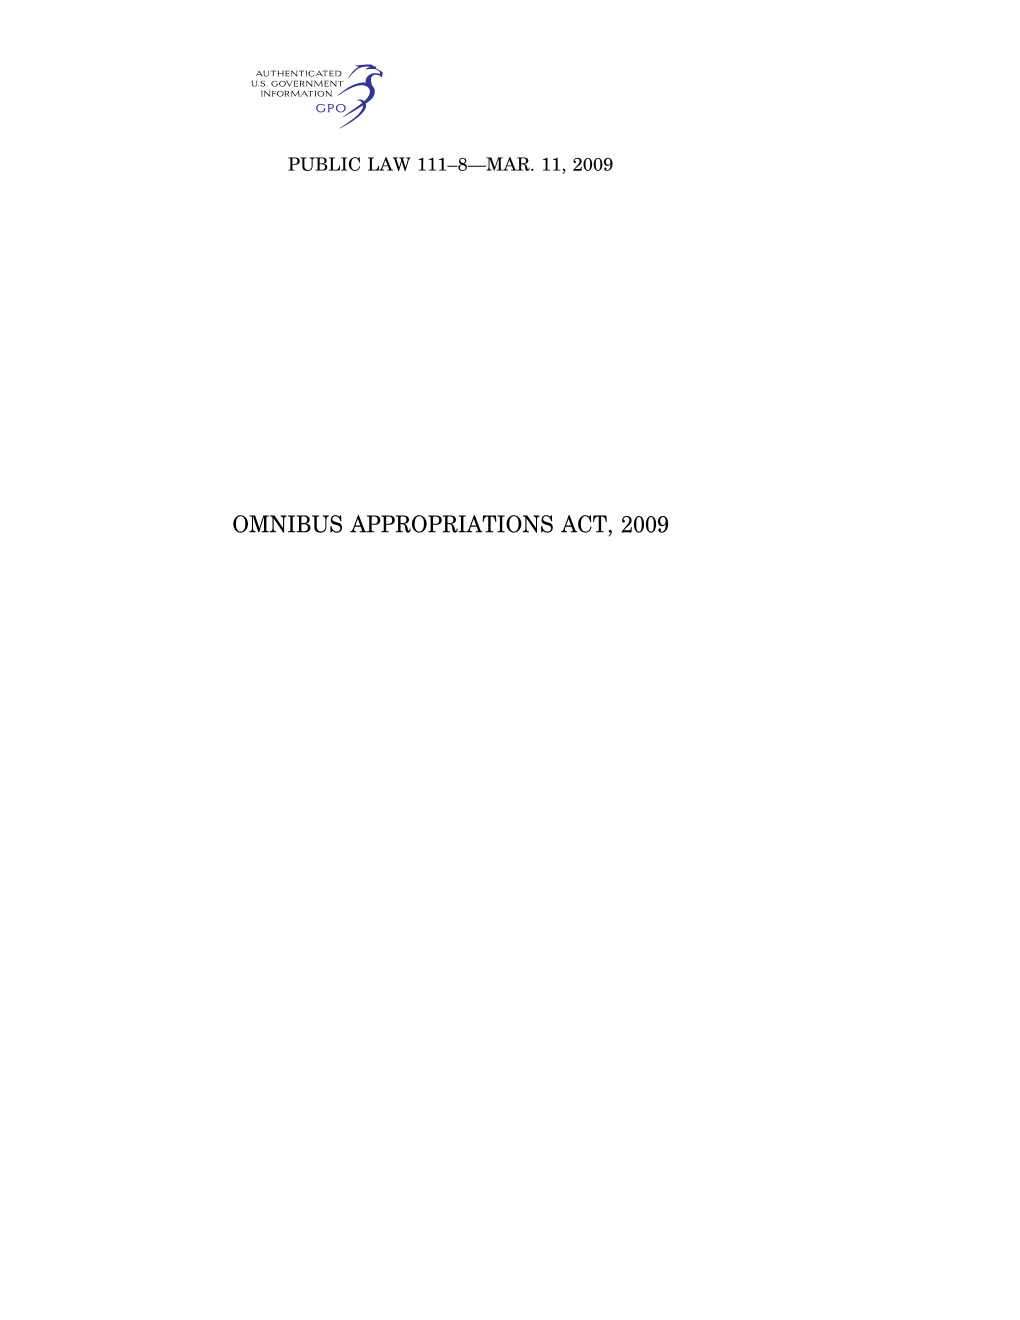 Omnibus Appropriations Act, 2009